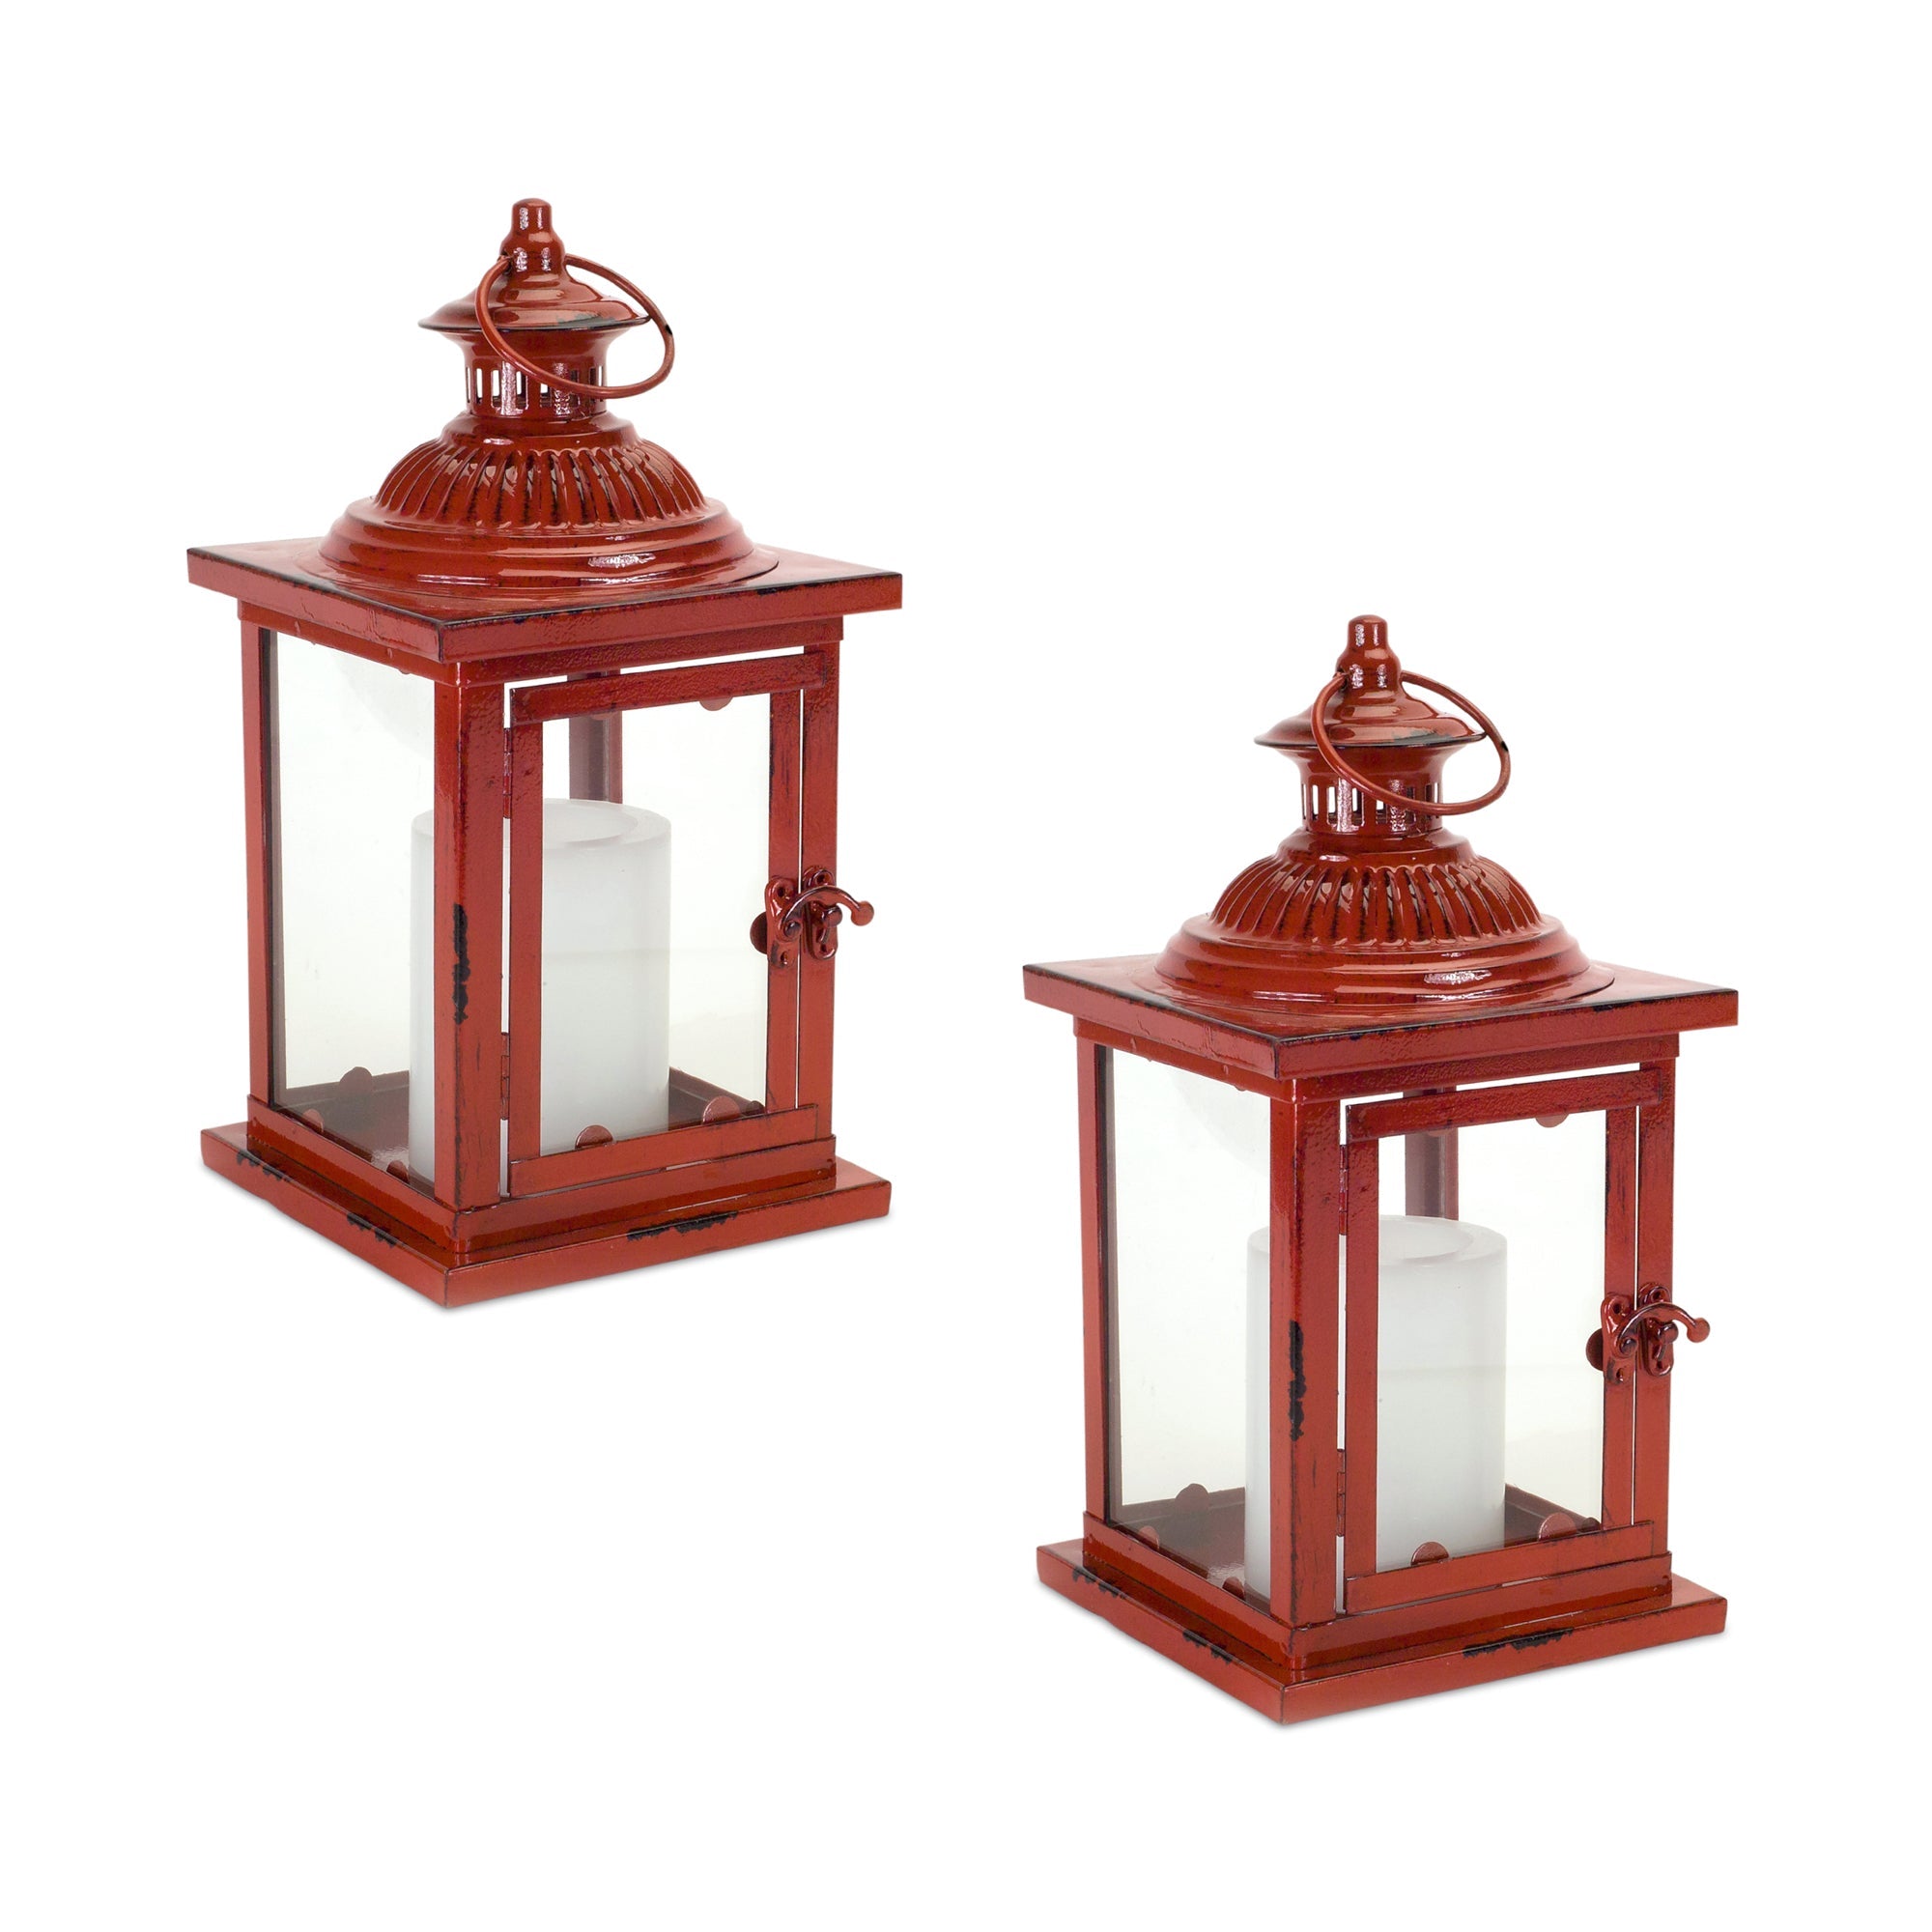 Set Of Two Red Flameless Floor Lantern Candle Holder - Tuesday Morning-Candle Holders